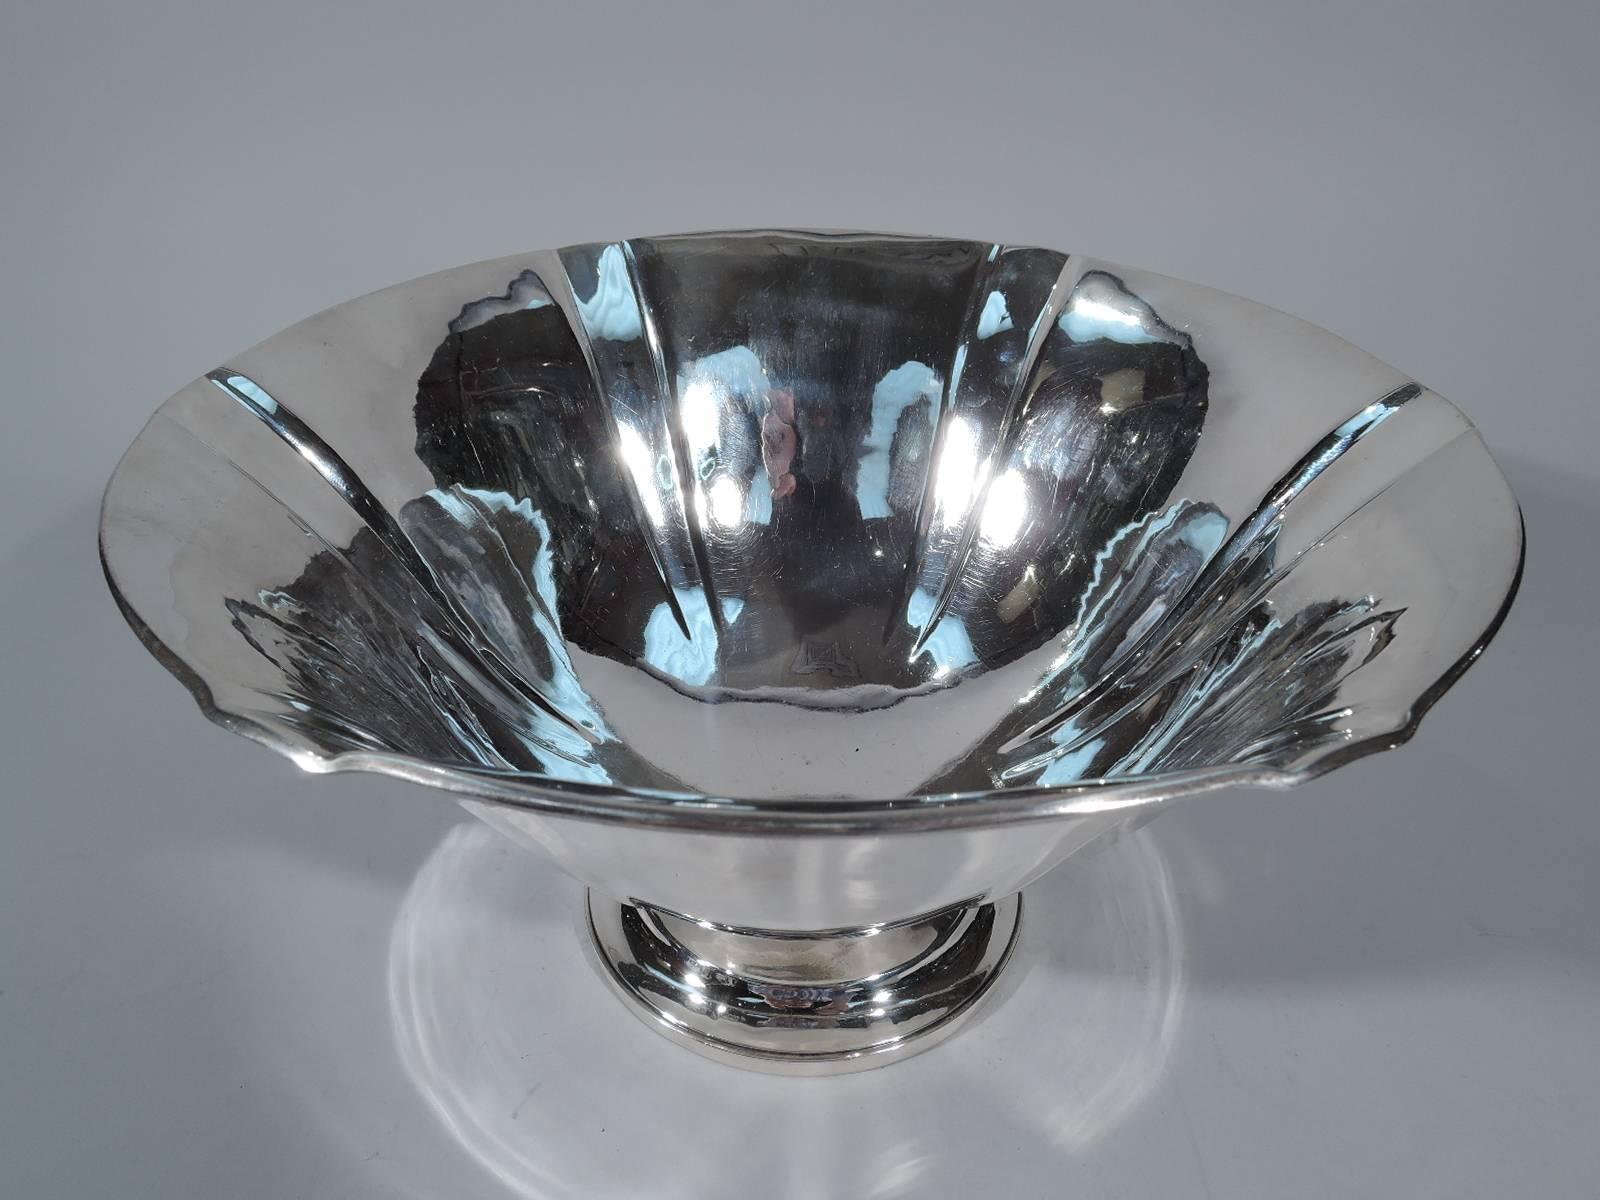 Sterling silver bowl. Made by Arthur Stone in Gardner, Mass., circa 1920. Tapering sides with six pilasters. Stepped circular foot. A fine piece by the historic Craftsman maker. Hallmark includes craftsman’s initial T for Herbert A. Taylor